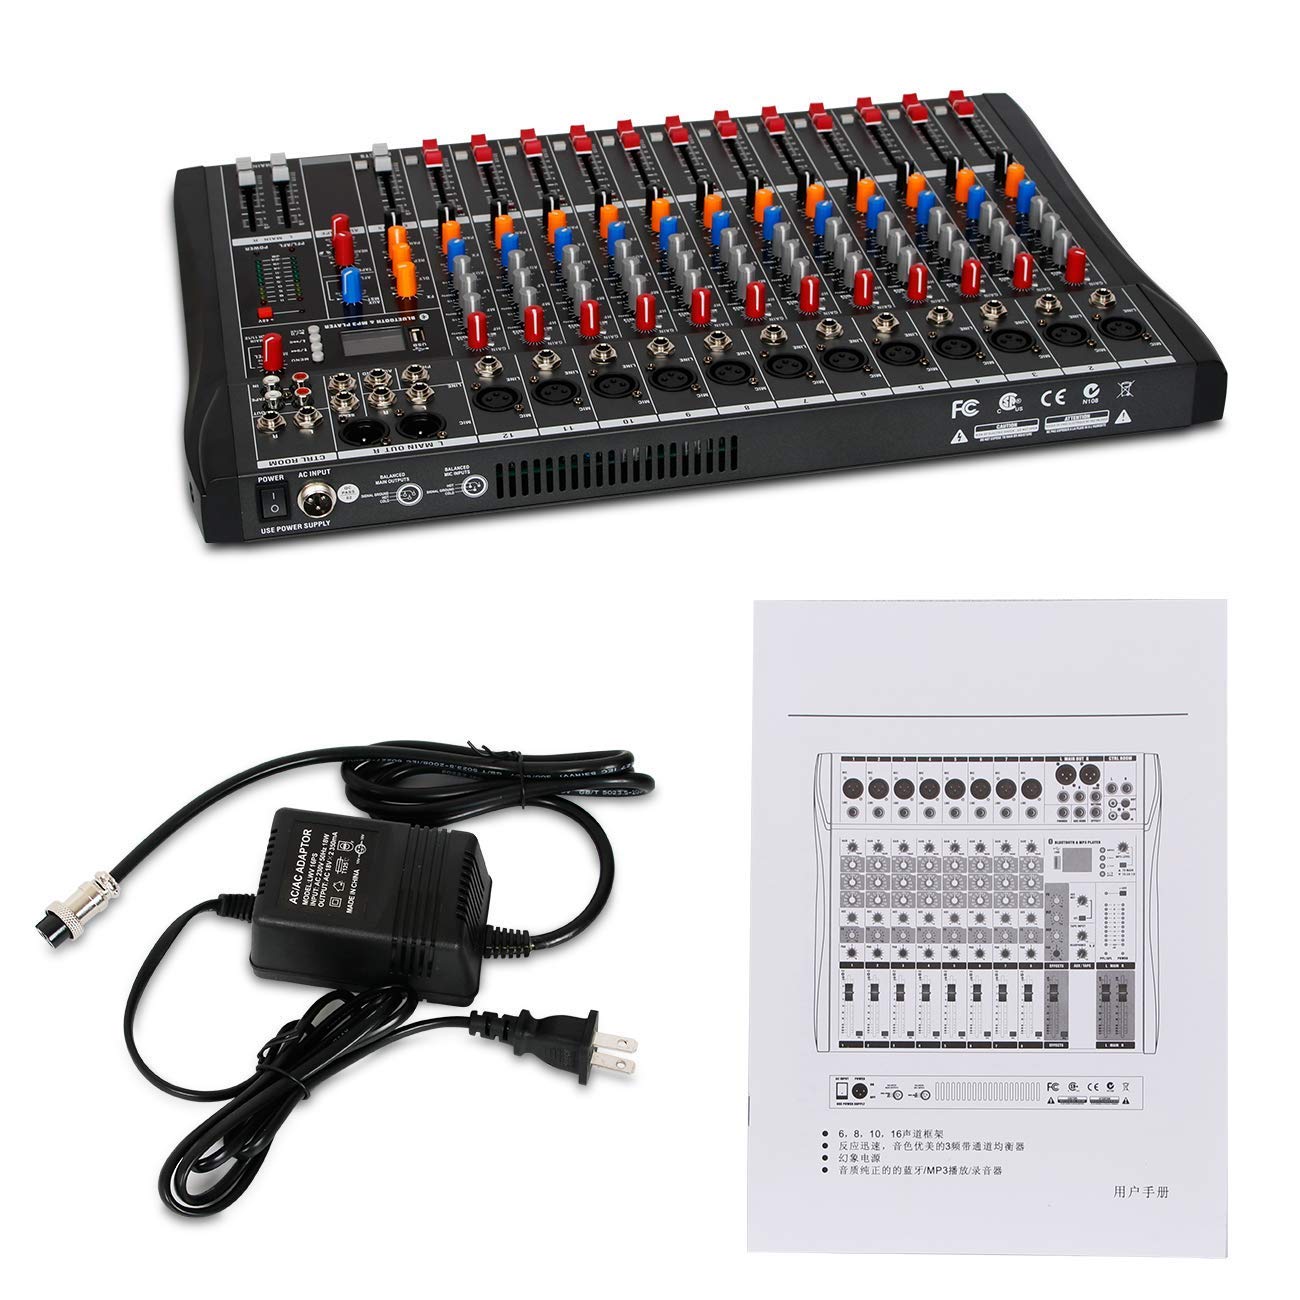 Depensheng DX12 DJ Sound Controller Interface w/USB Drive for Computer Recording 12-Channel Studio Audio Mixer - XLR Microphone Jack, 48V Power, RCA Input/Output for Professional and Beginners